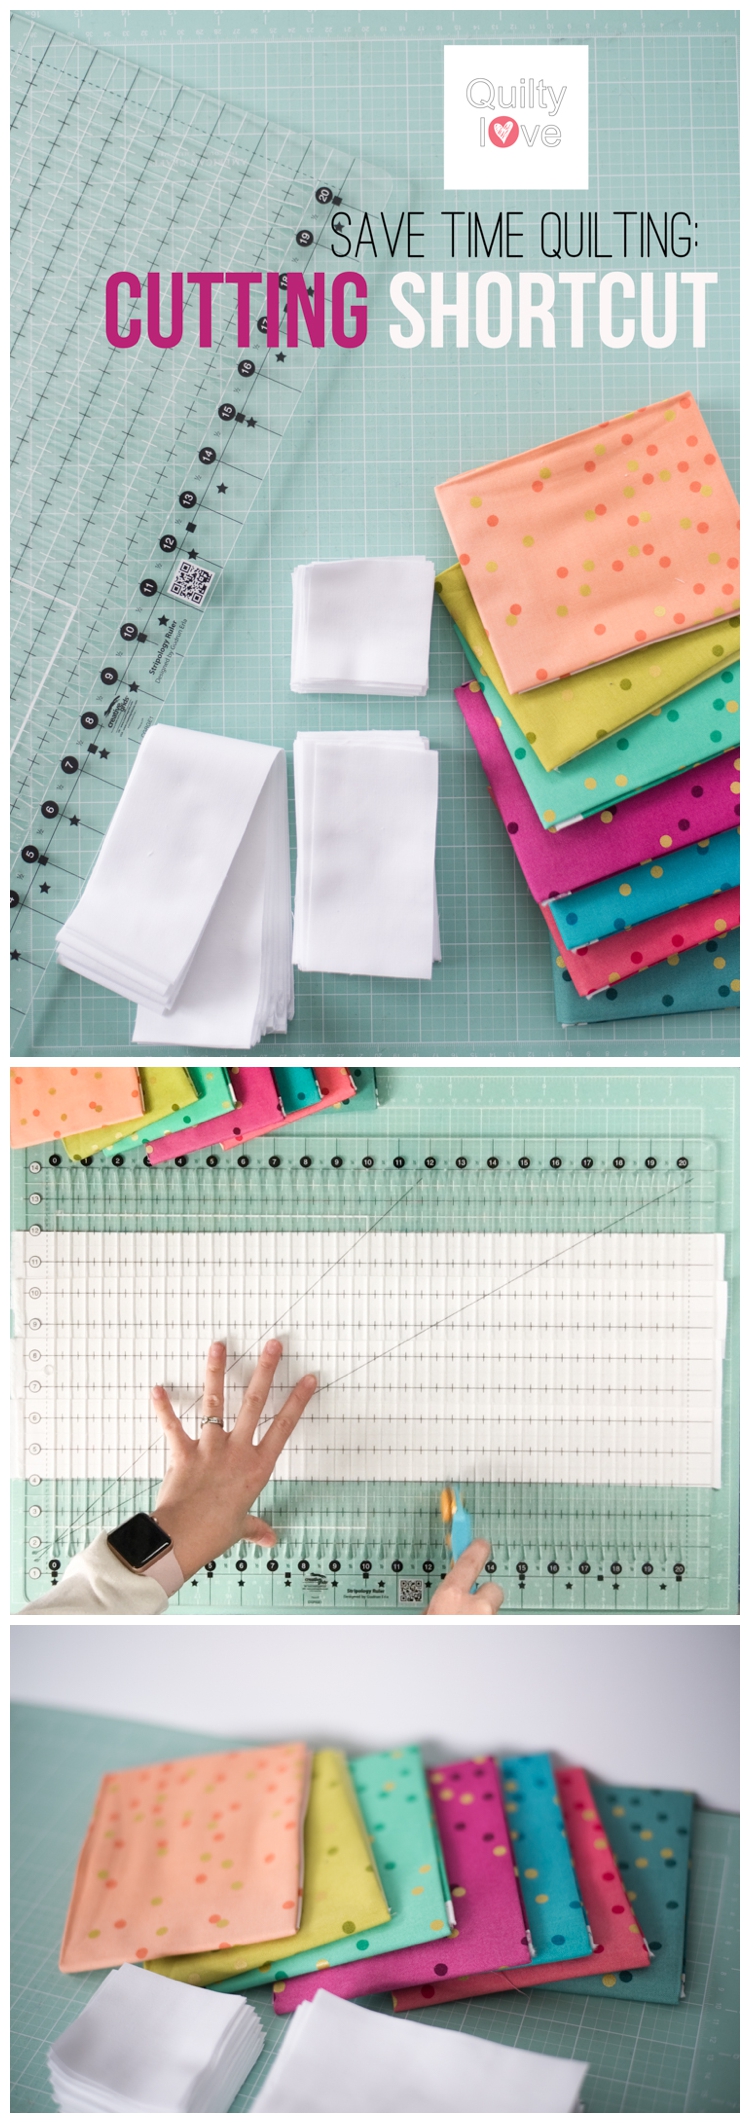 Save time quilting with this cutting shortcut